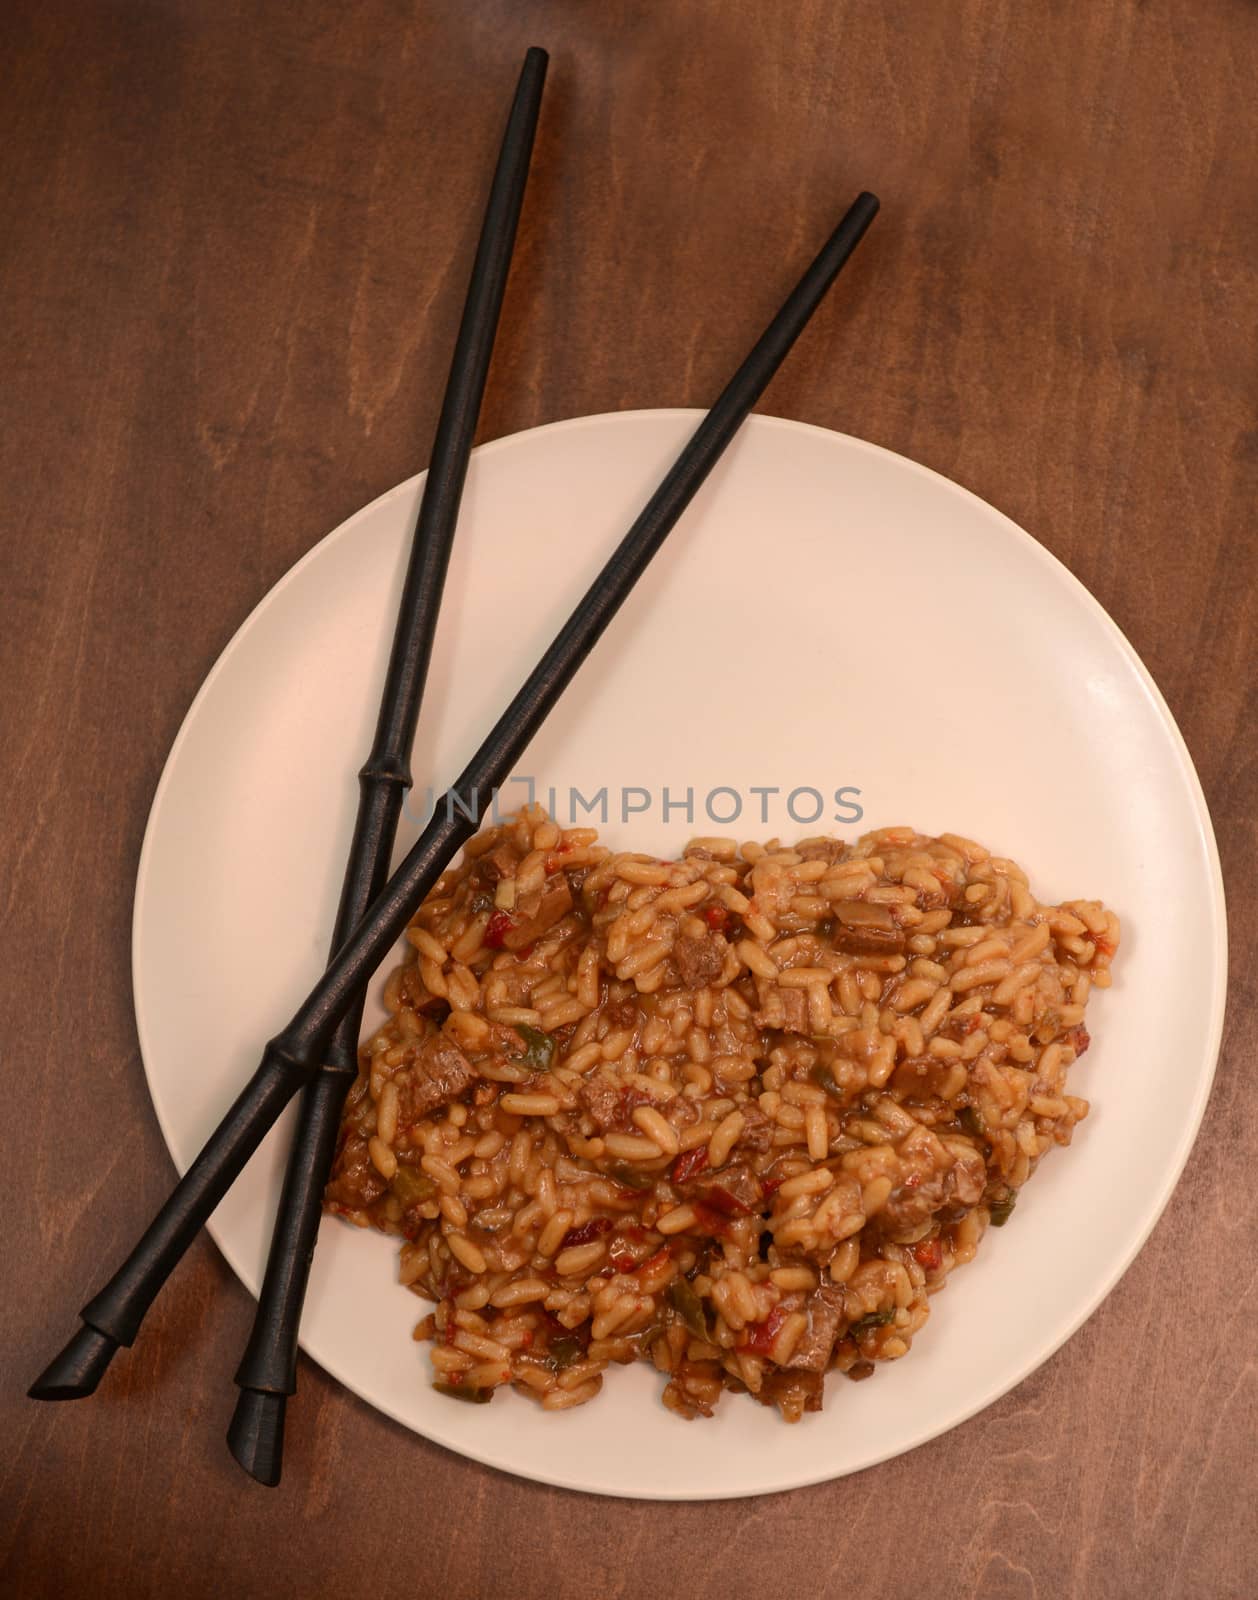 rice dish with chopsticks on wood table